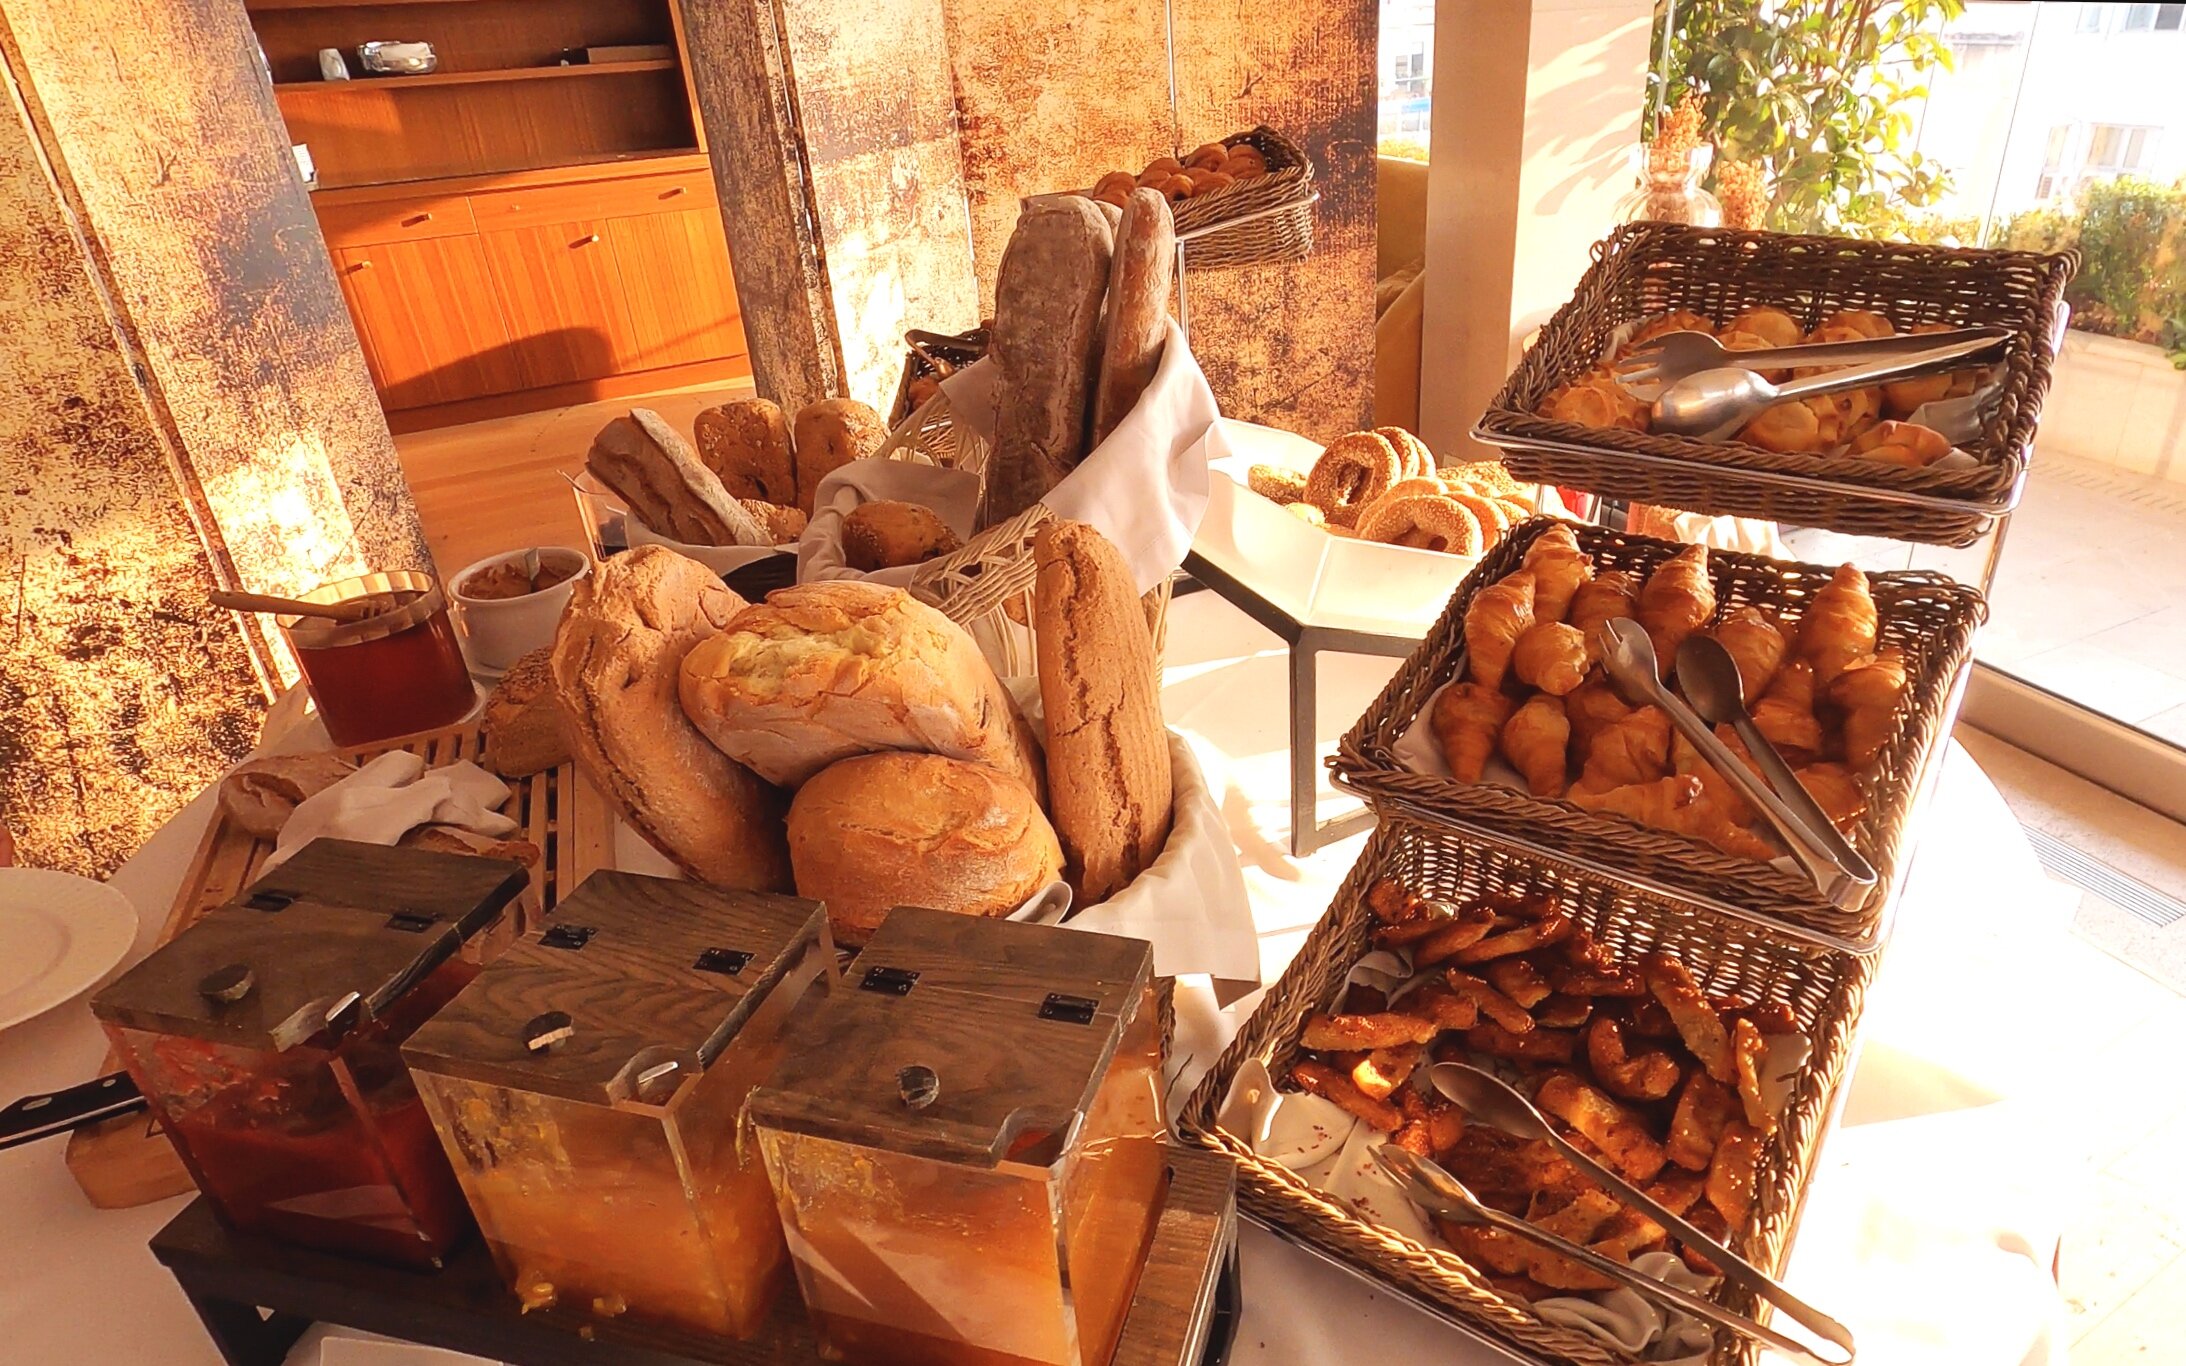 The bread and pastry selection.